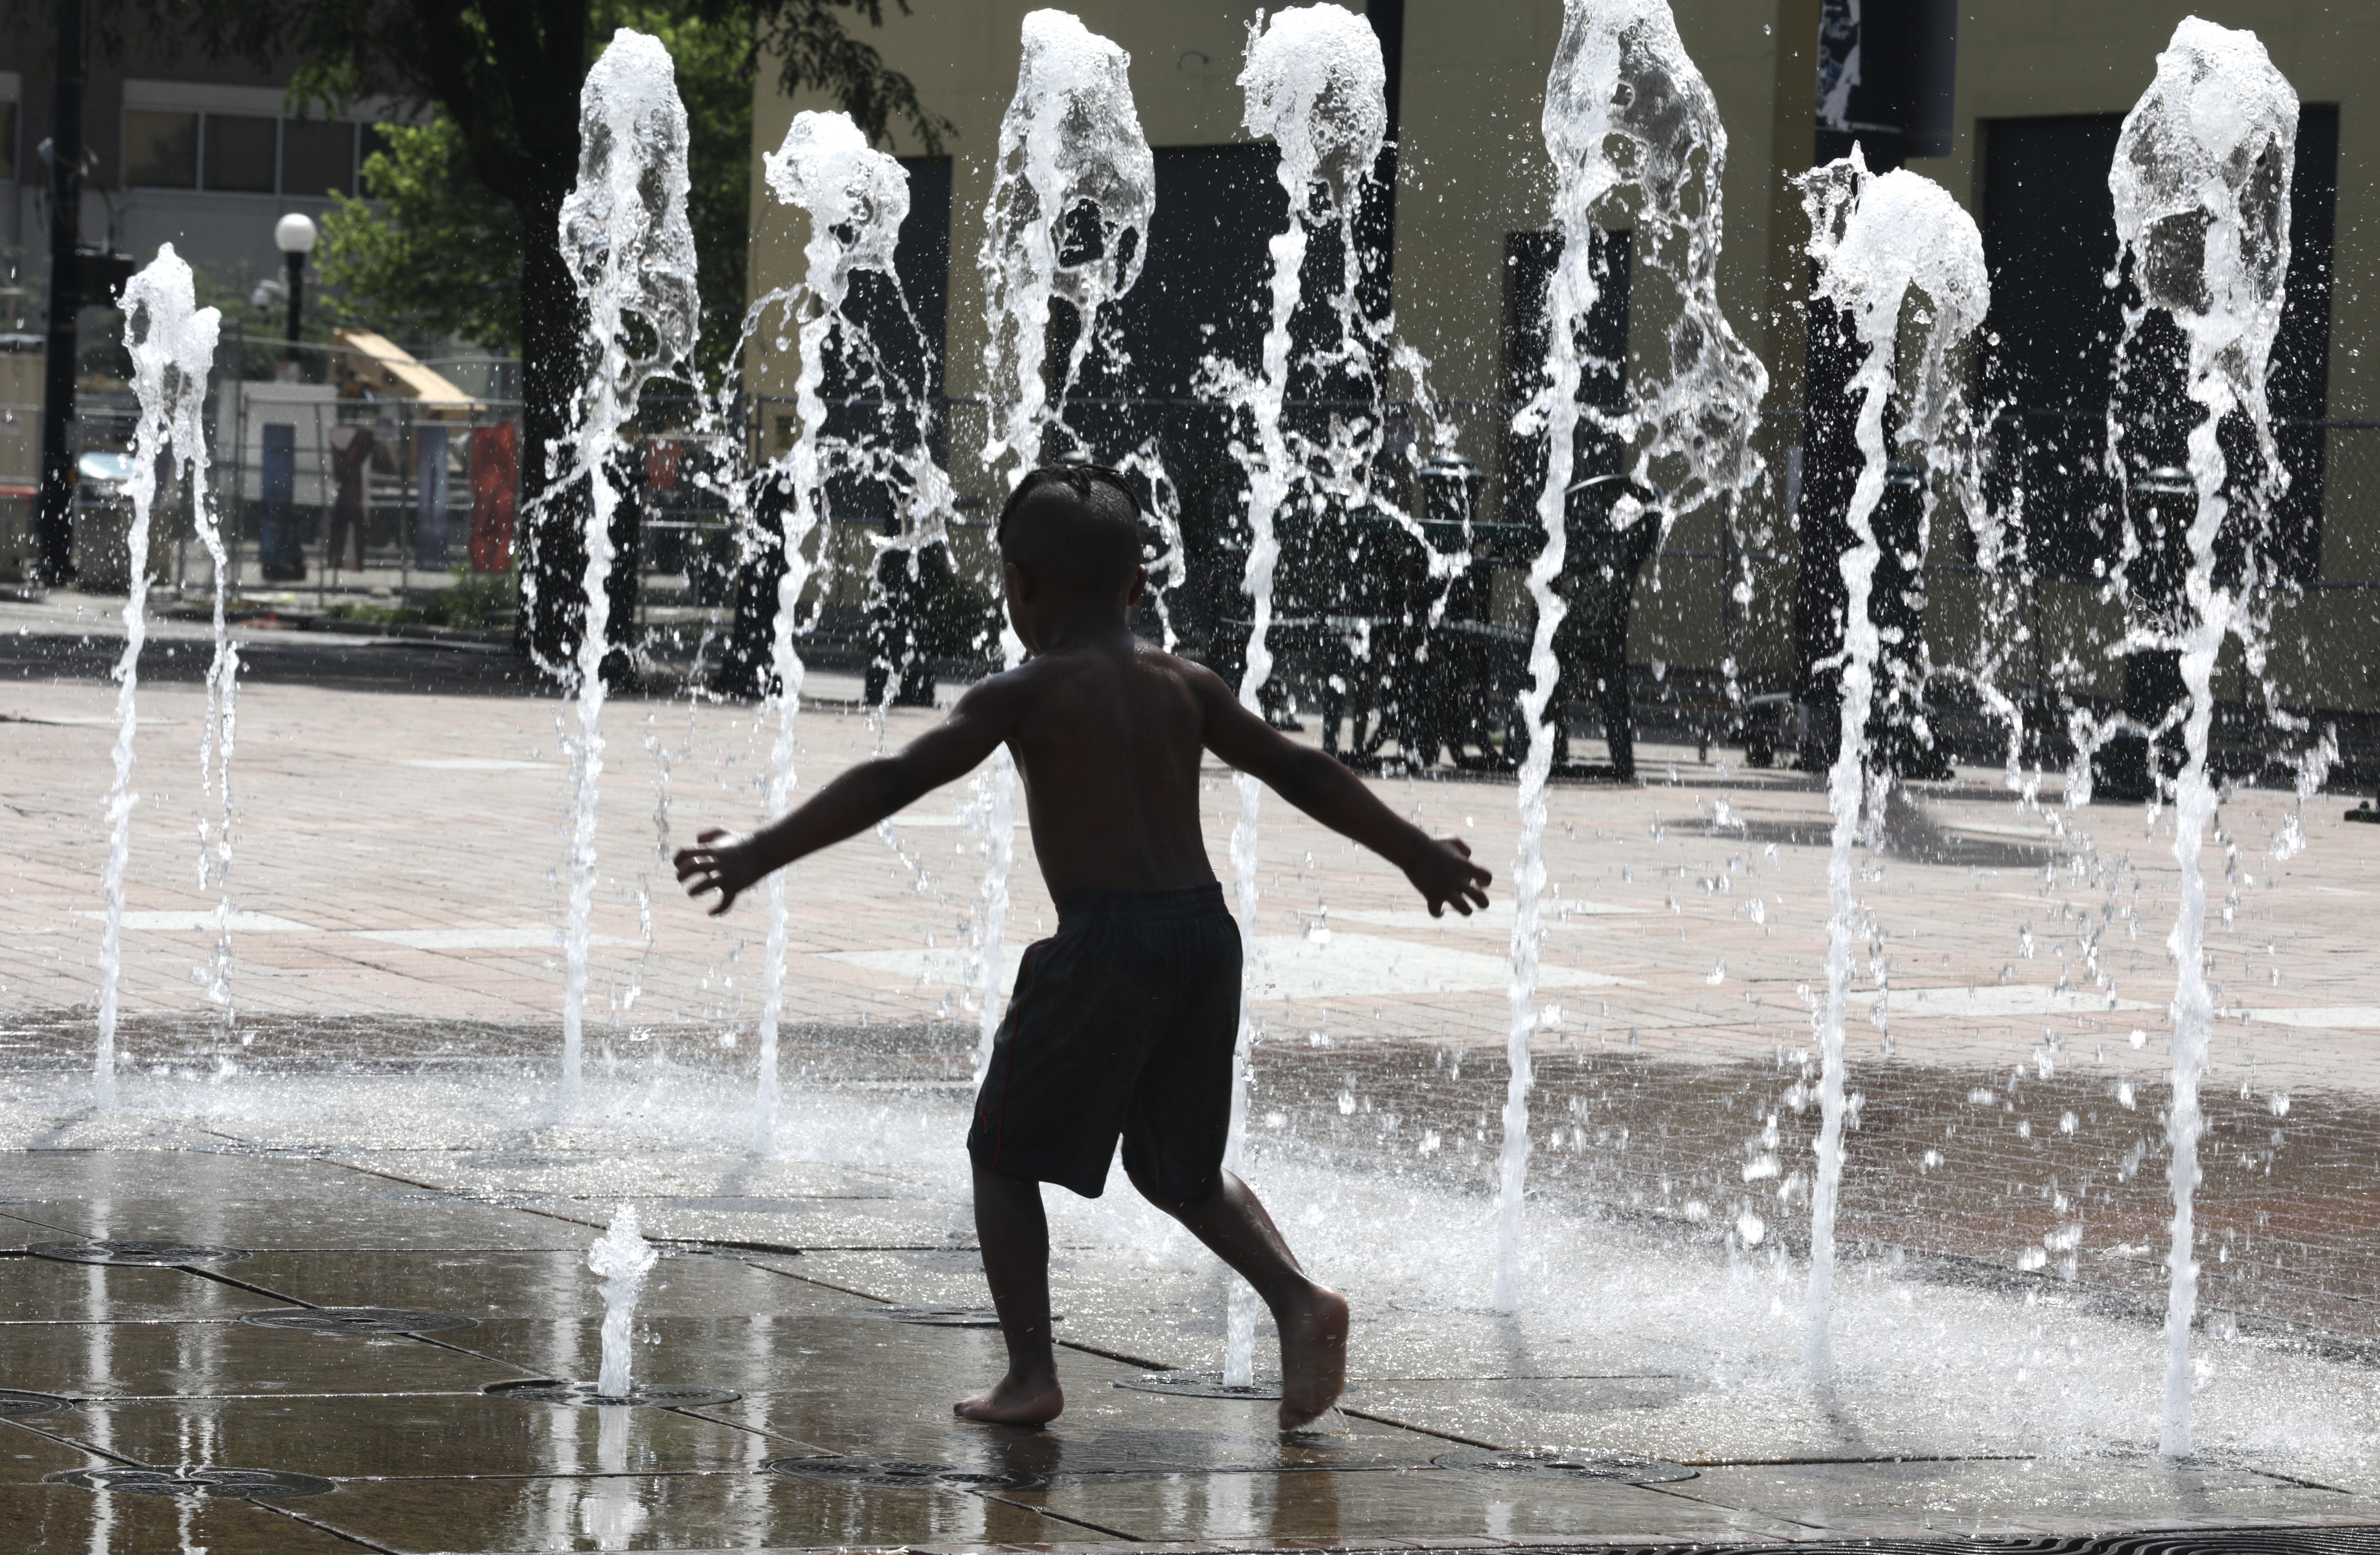 Ollie Arnold, 4, cools off in the interactive fountain at Van Cleve Park in downtown Dayton on Monday, June 13, 2022. BILL LACKEY/STAFF